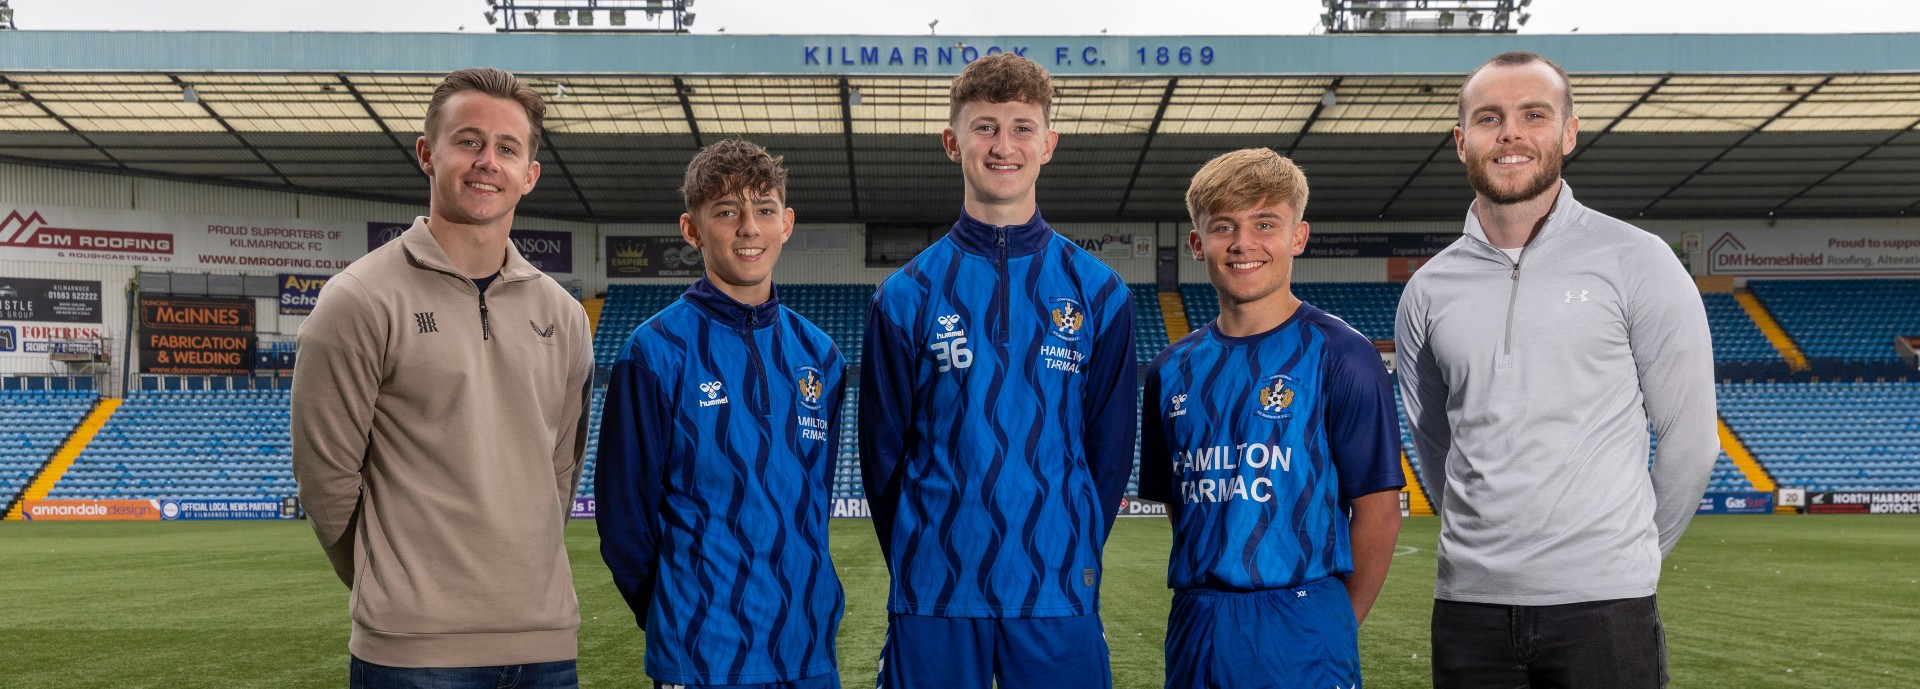 Wellbeing Coaches Bradley Fullarton and Louis Kerr on the pitch at Kilmarnock Football Club with under-18s players Josh, Logan and Charlie